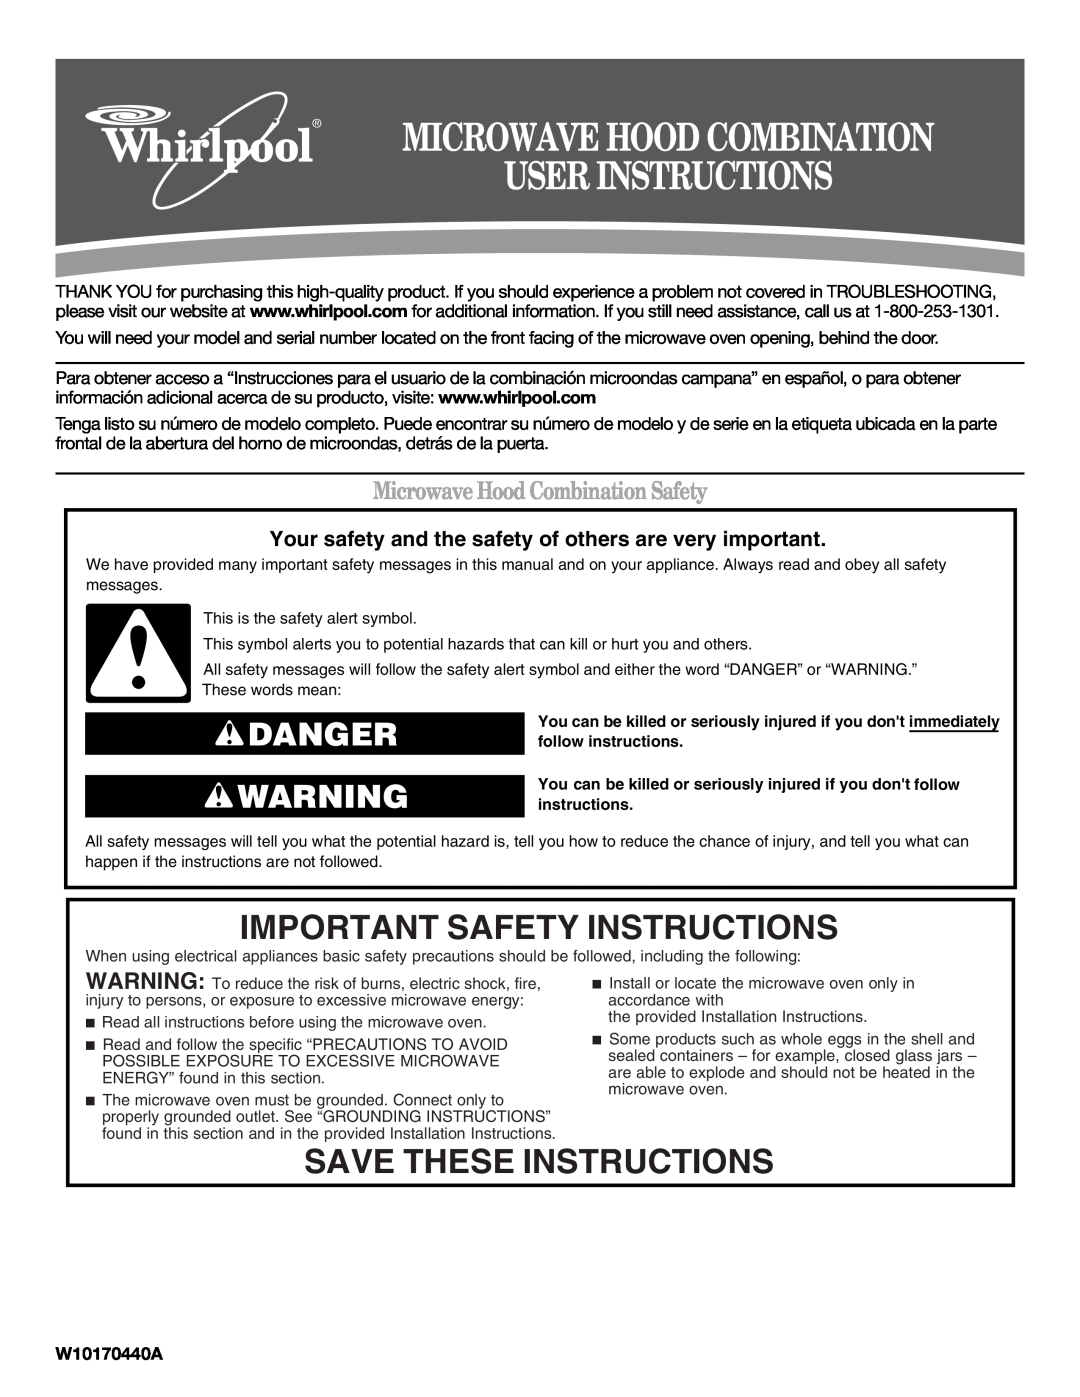 Whirlpool W10170440A important safety instructions Important Safety Instructions, Save These Instructions, Danger 